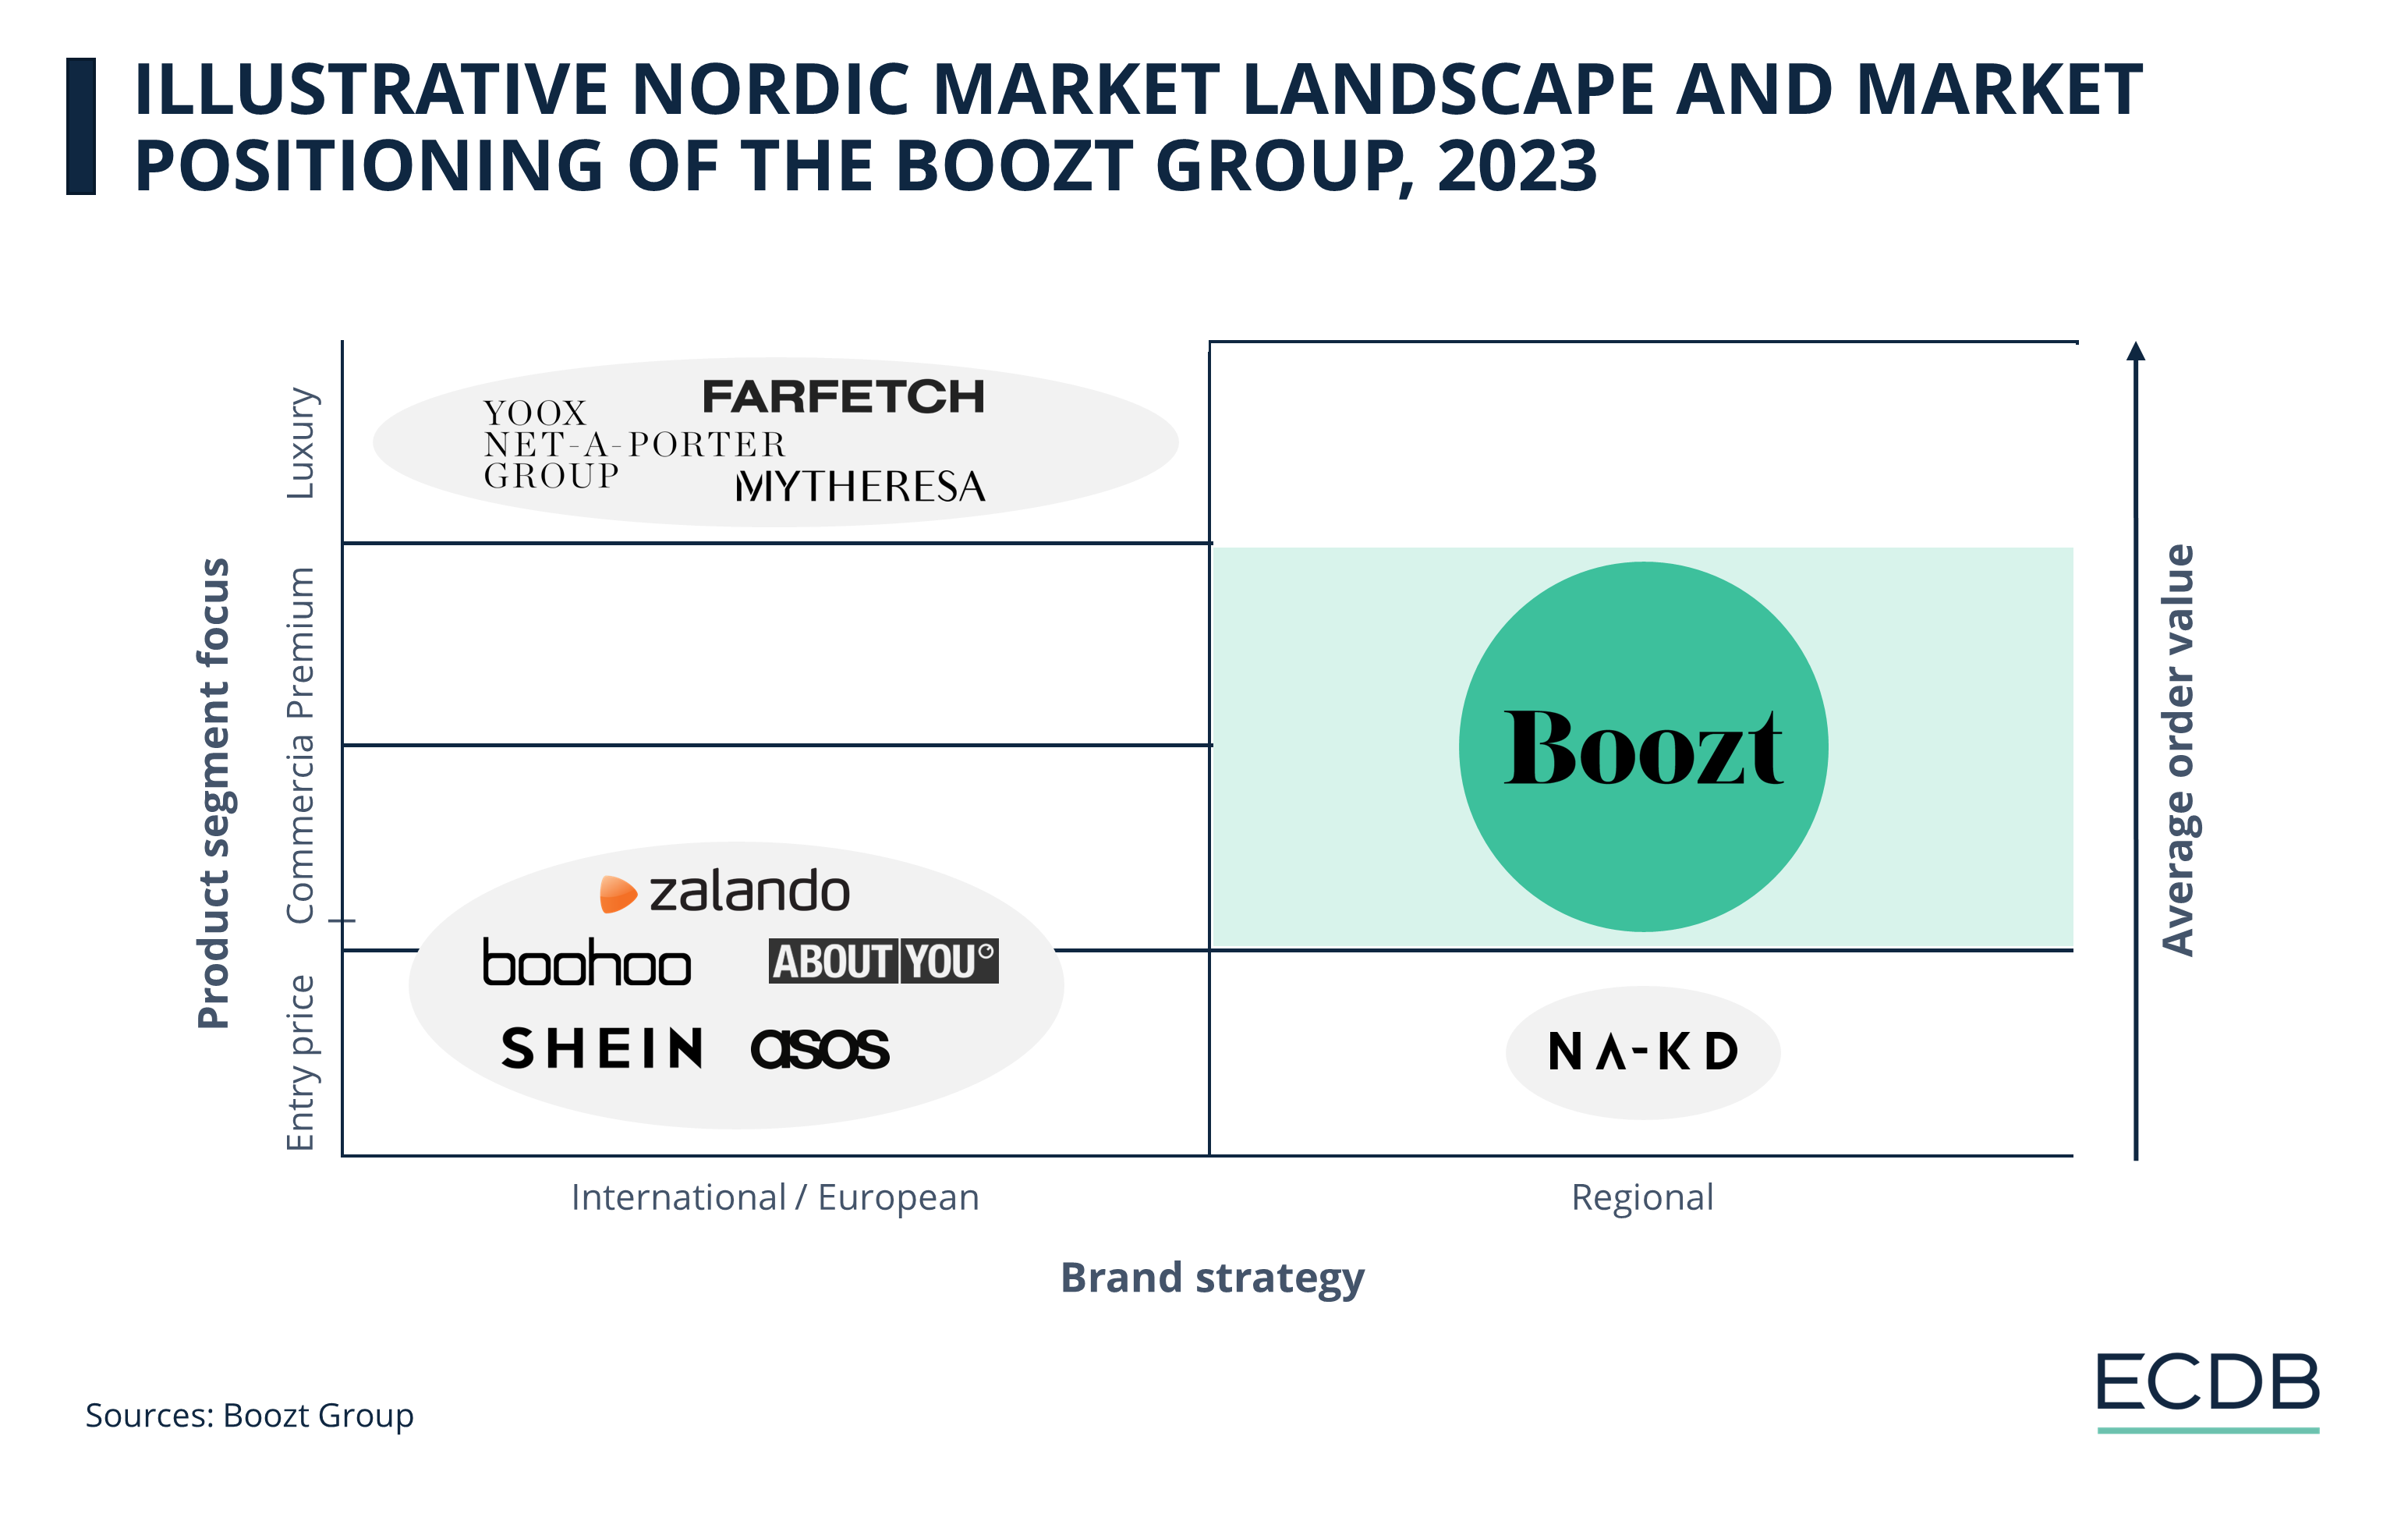 Illustrative Nordic Market Landscape and Market Positioning of the Boozt Group